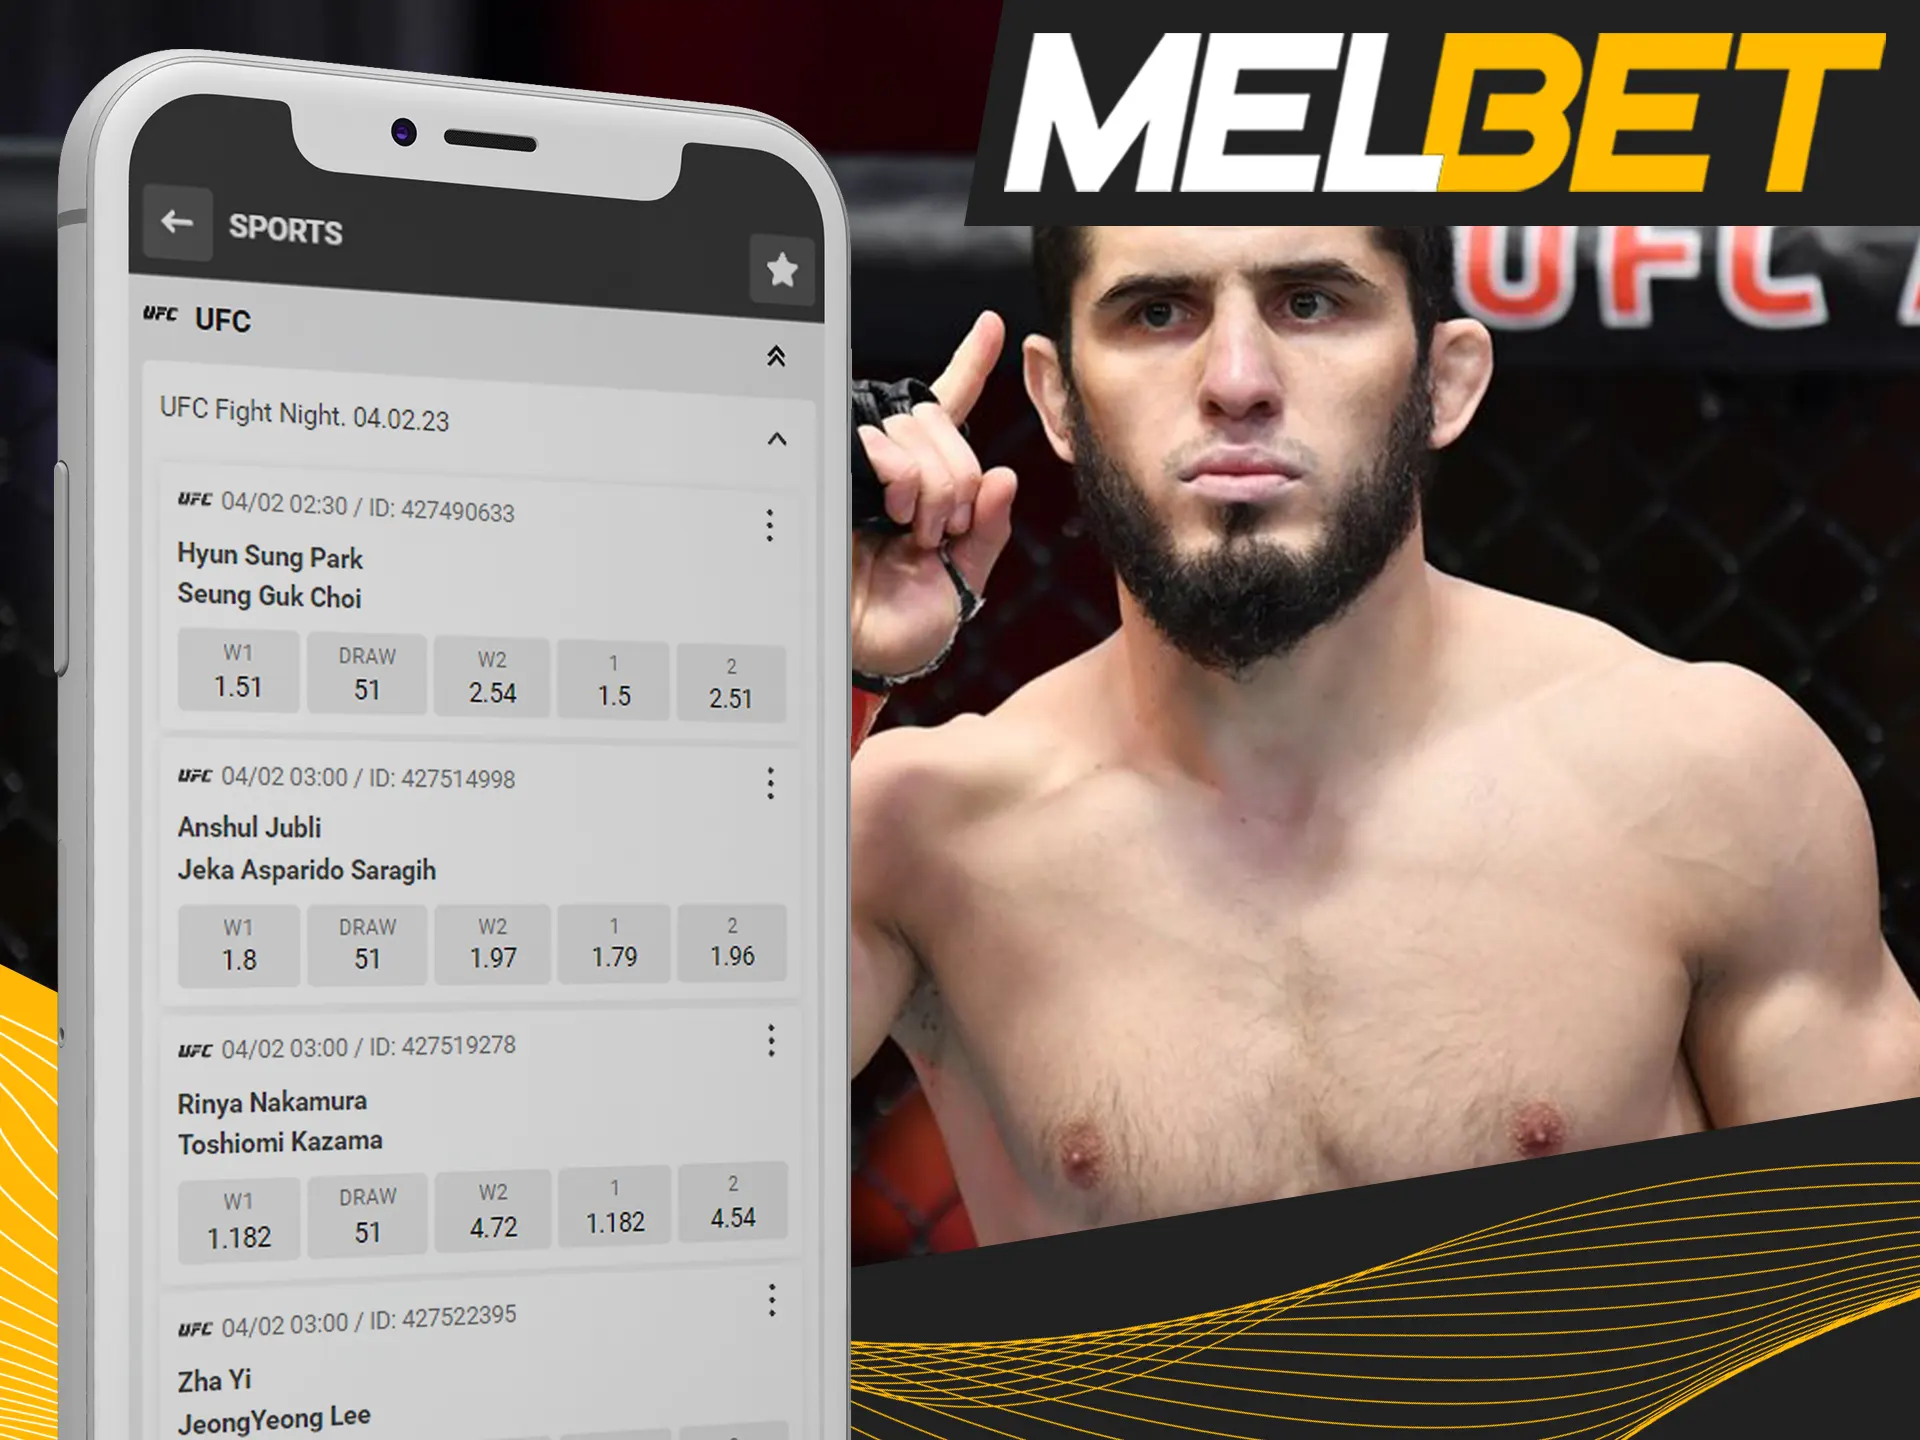 Bet on UFC players and watch matches in live at Melbet.